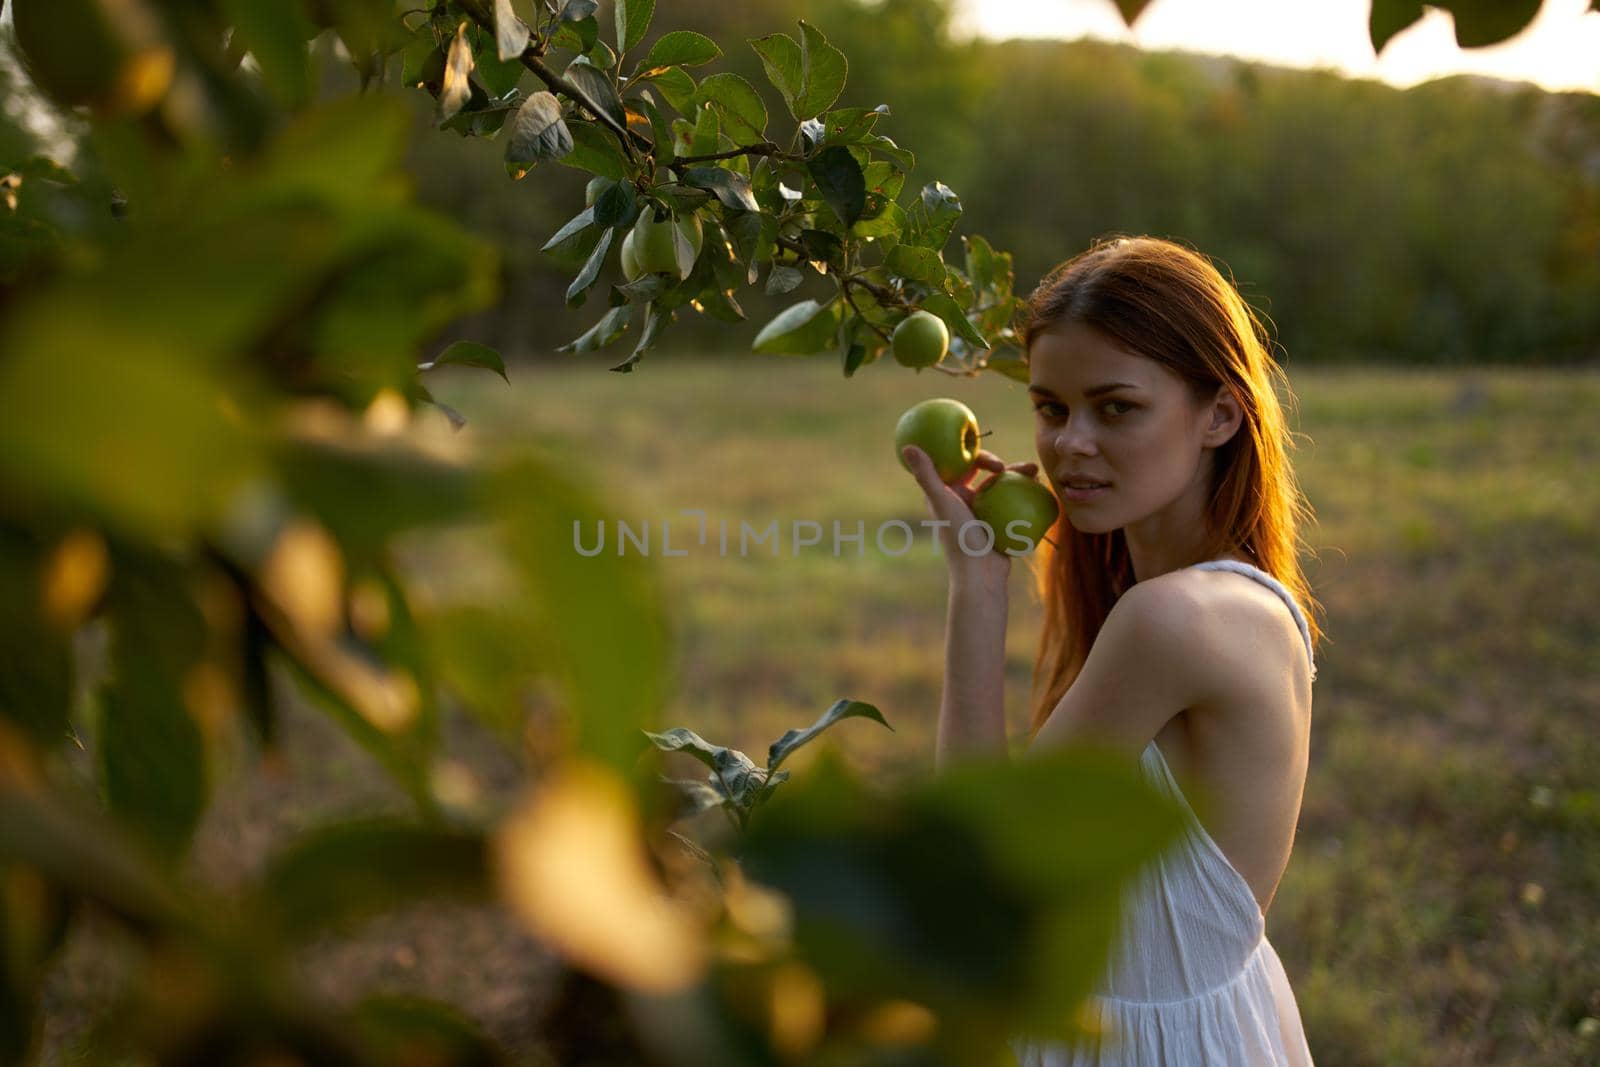 Woman in white dress picks apples from a tree in a nature field by SHOTPRIME